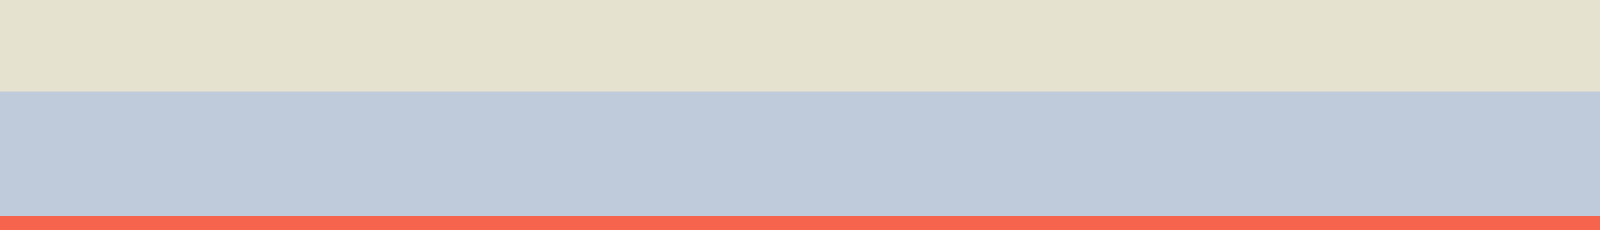 cropped-banner3color2.gif